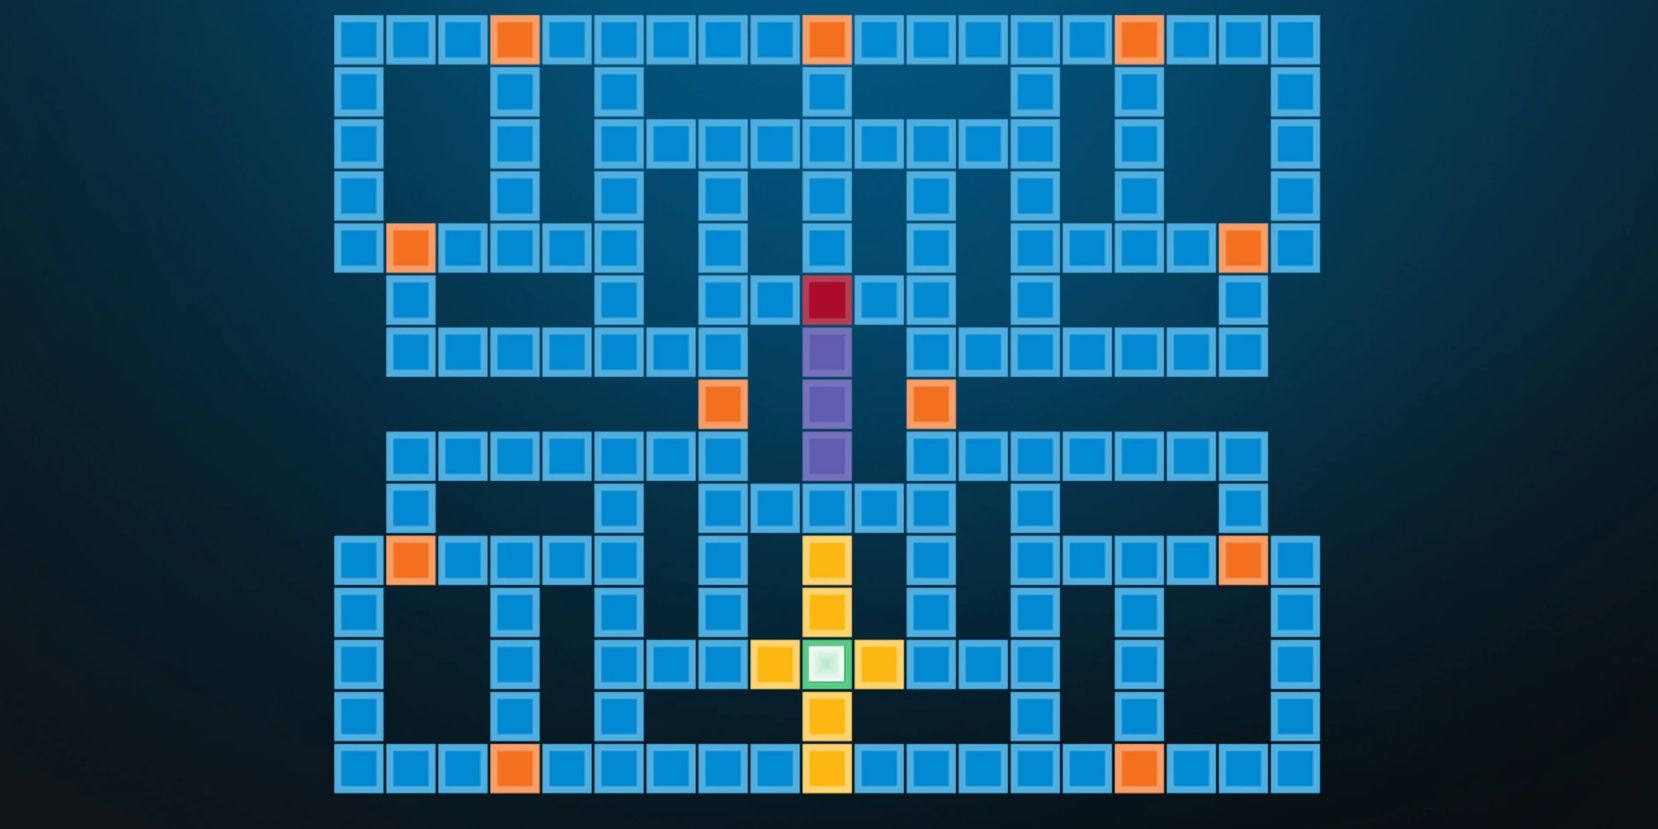 A level in Tiles